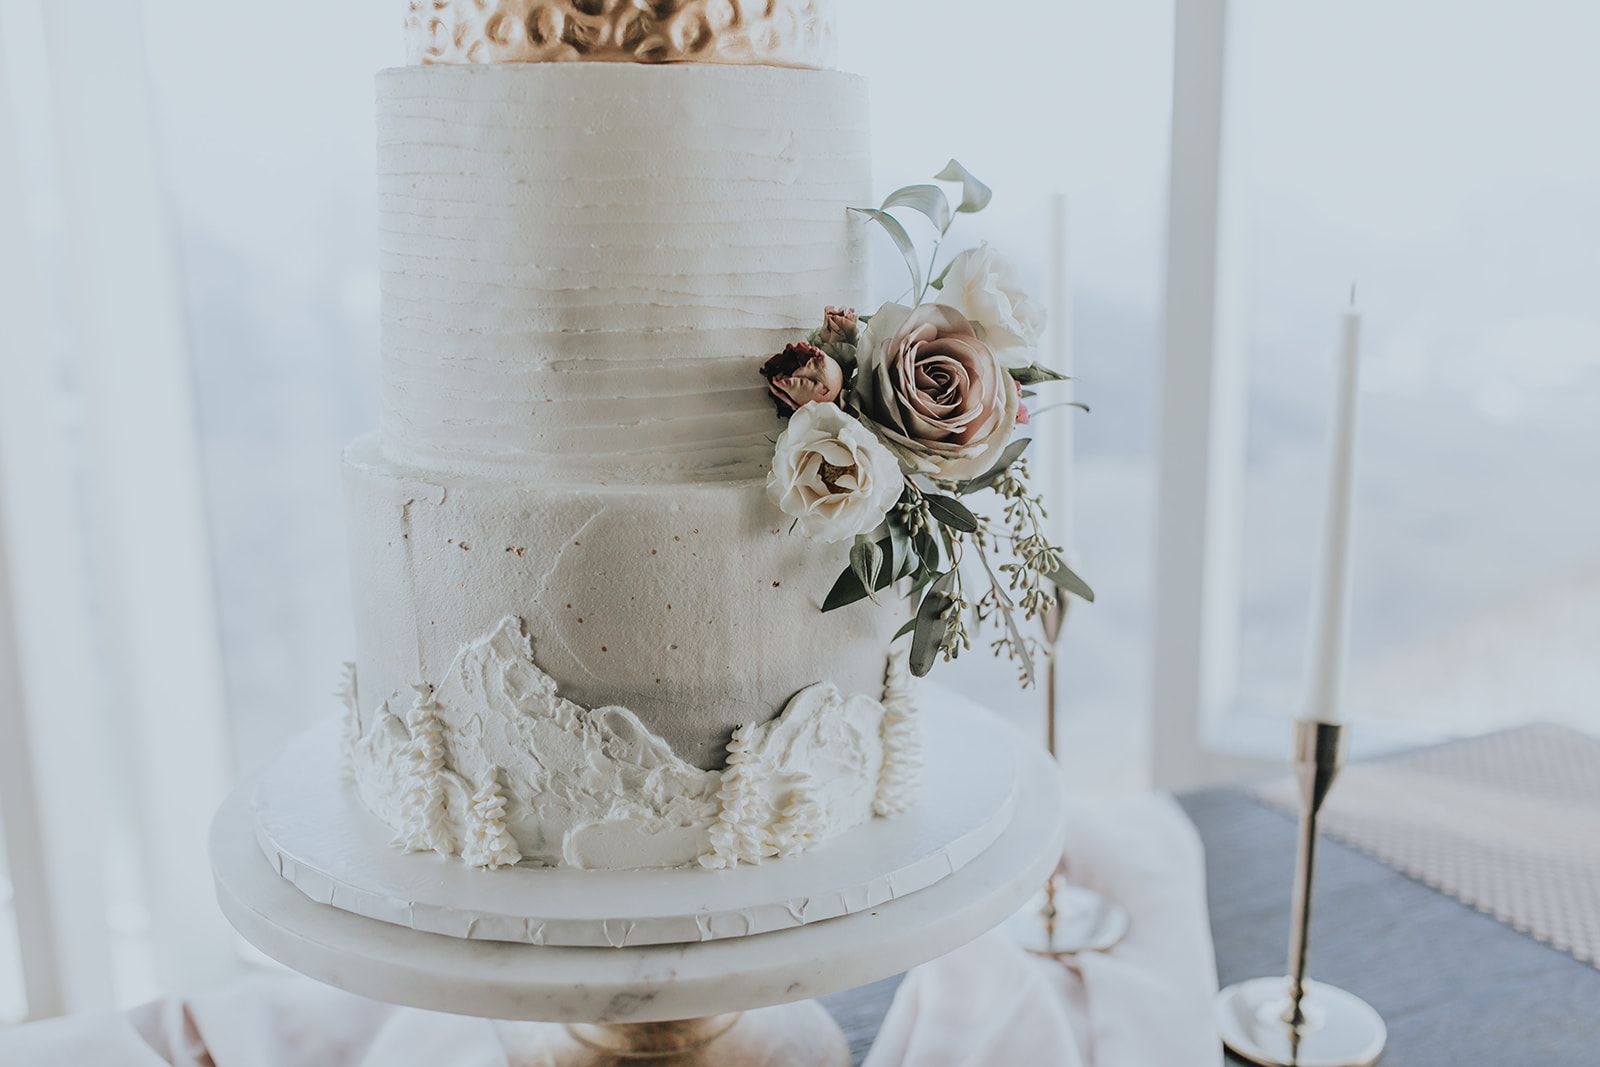 Covid-19 and Your Wedding // Part Three: Tips From The Pros - on the Bronte Bride Blog. Tips & Advice on Wedding Postponement, from local Albertan wedding photographers, planners, & other vendors. ,wedding cake, sky bistro banff